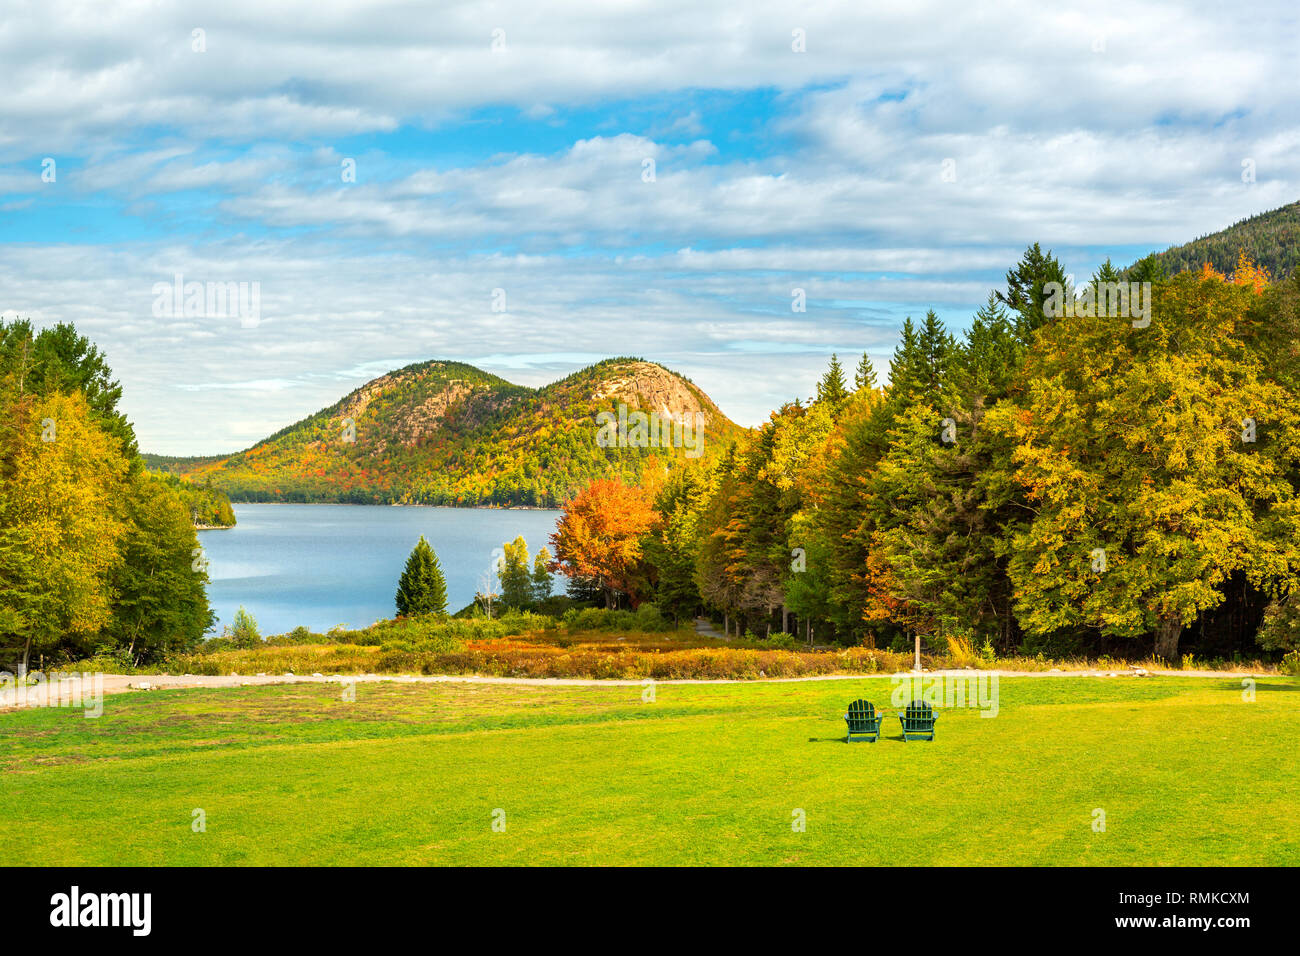 Jordan Pond and The Bubble mountains in Acadia National Park, Maine Stock Photo